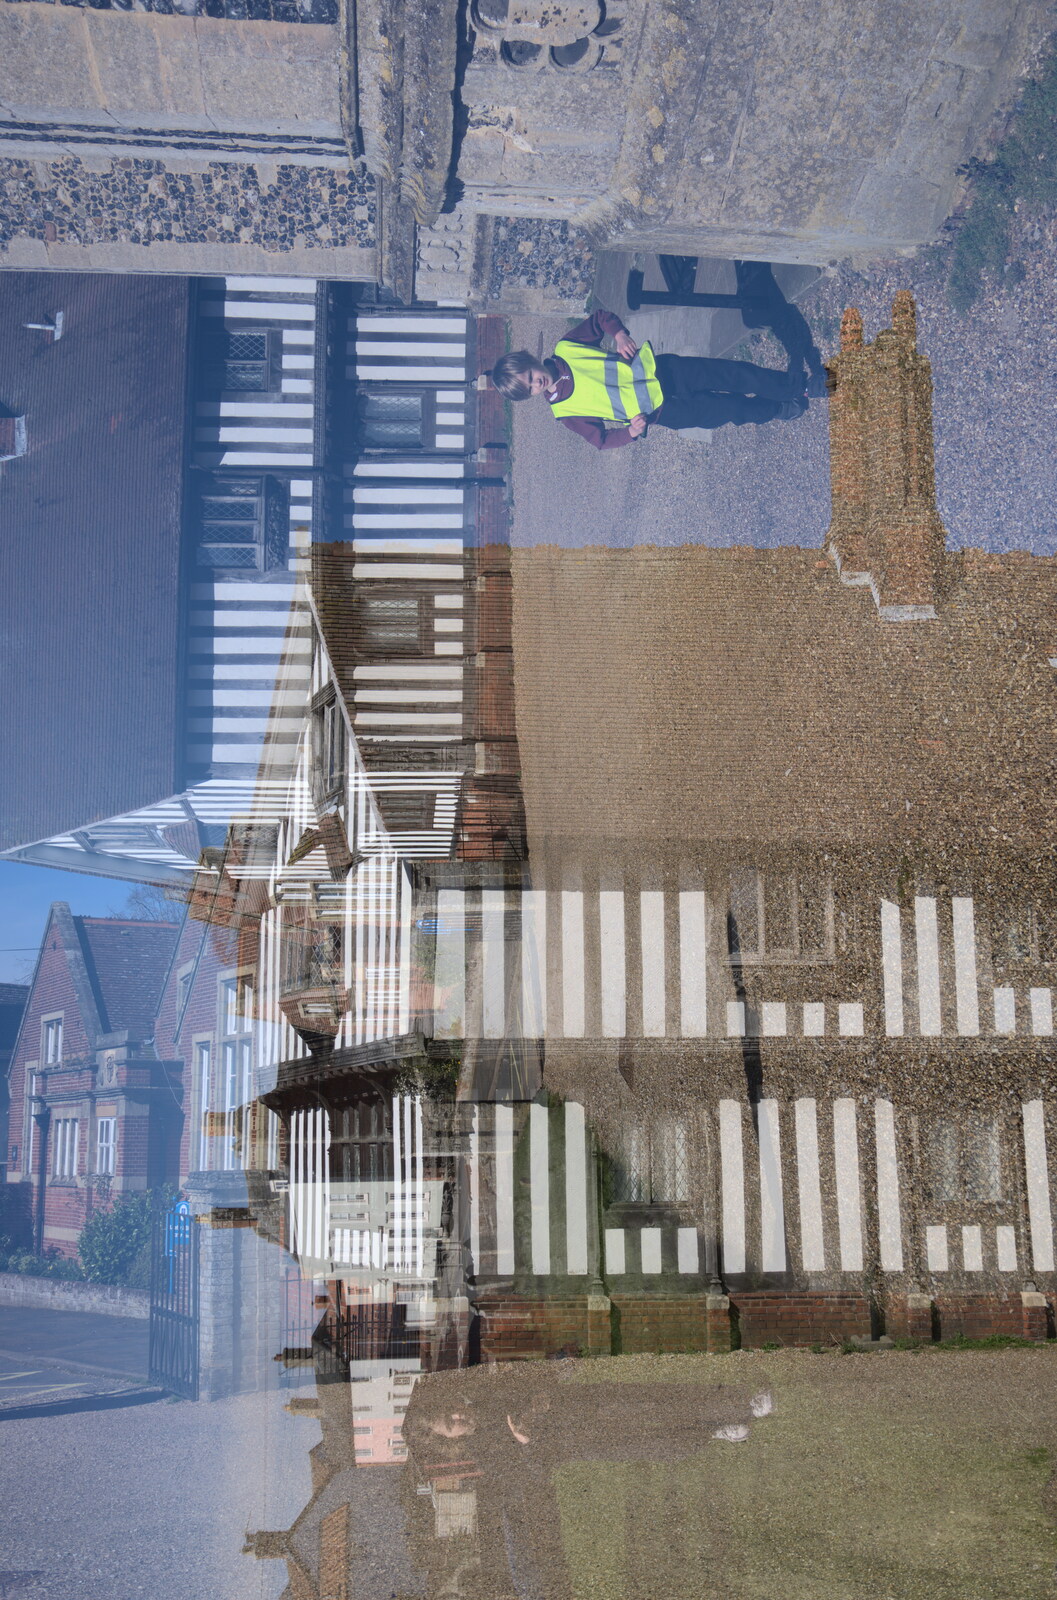 The overlapping photo result is interesting from Life Before Lockdown: A March Miscellany - 22nd March 2020